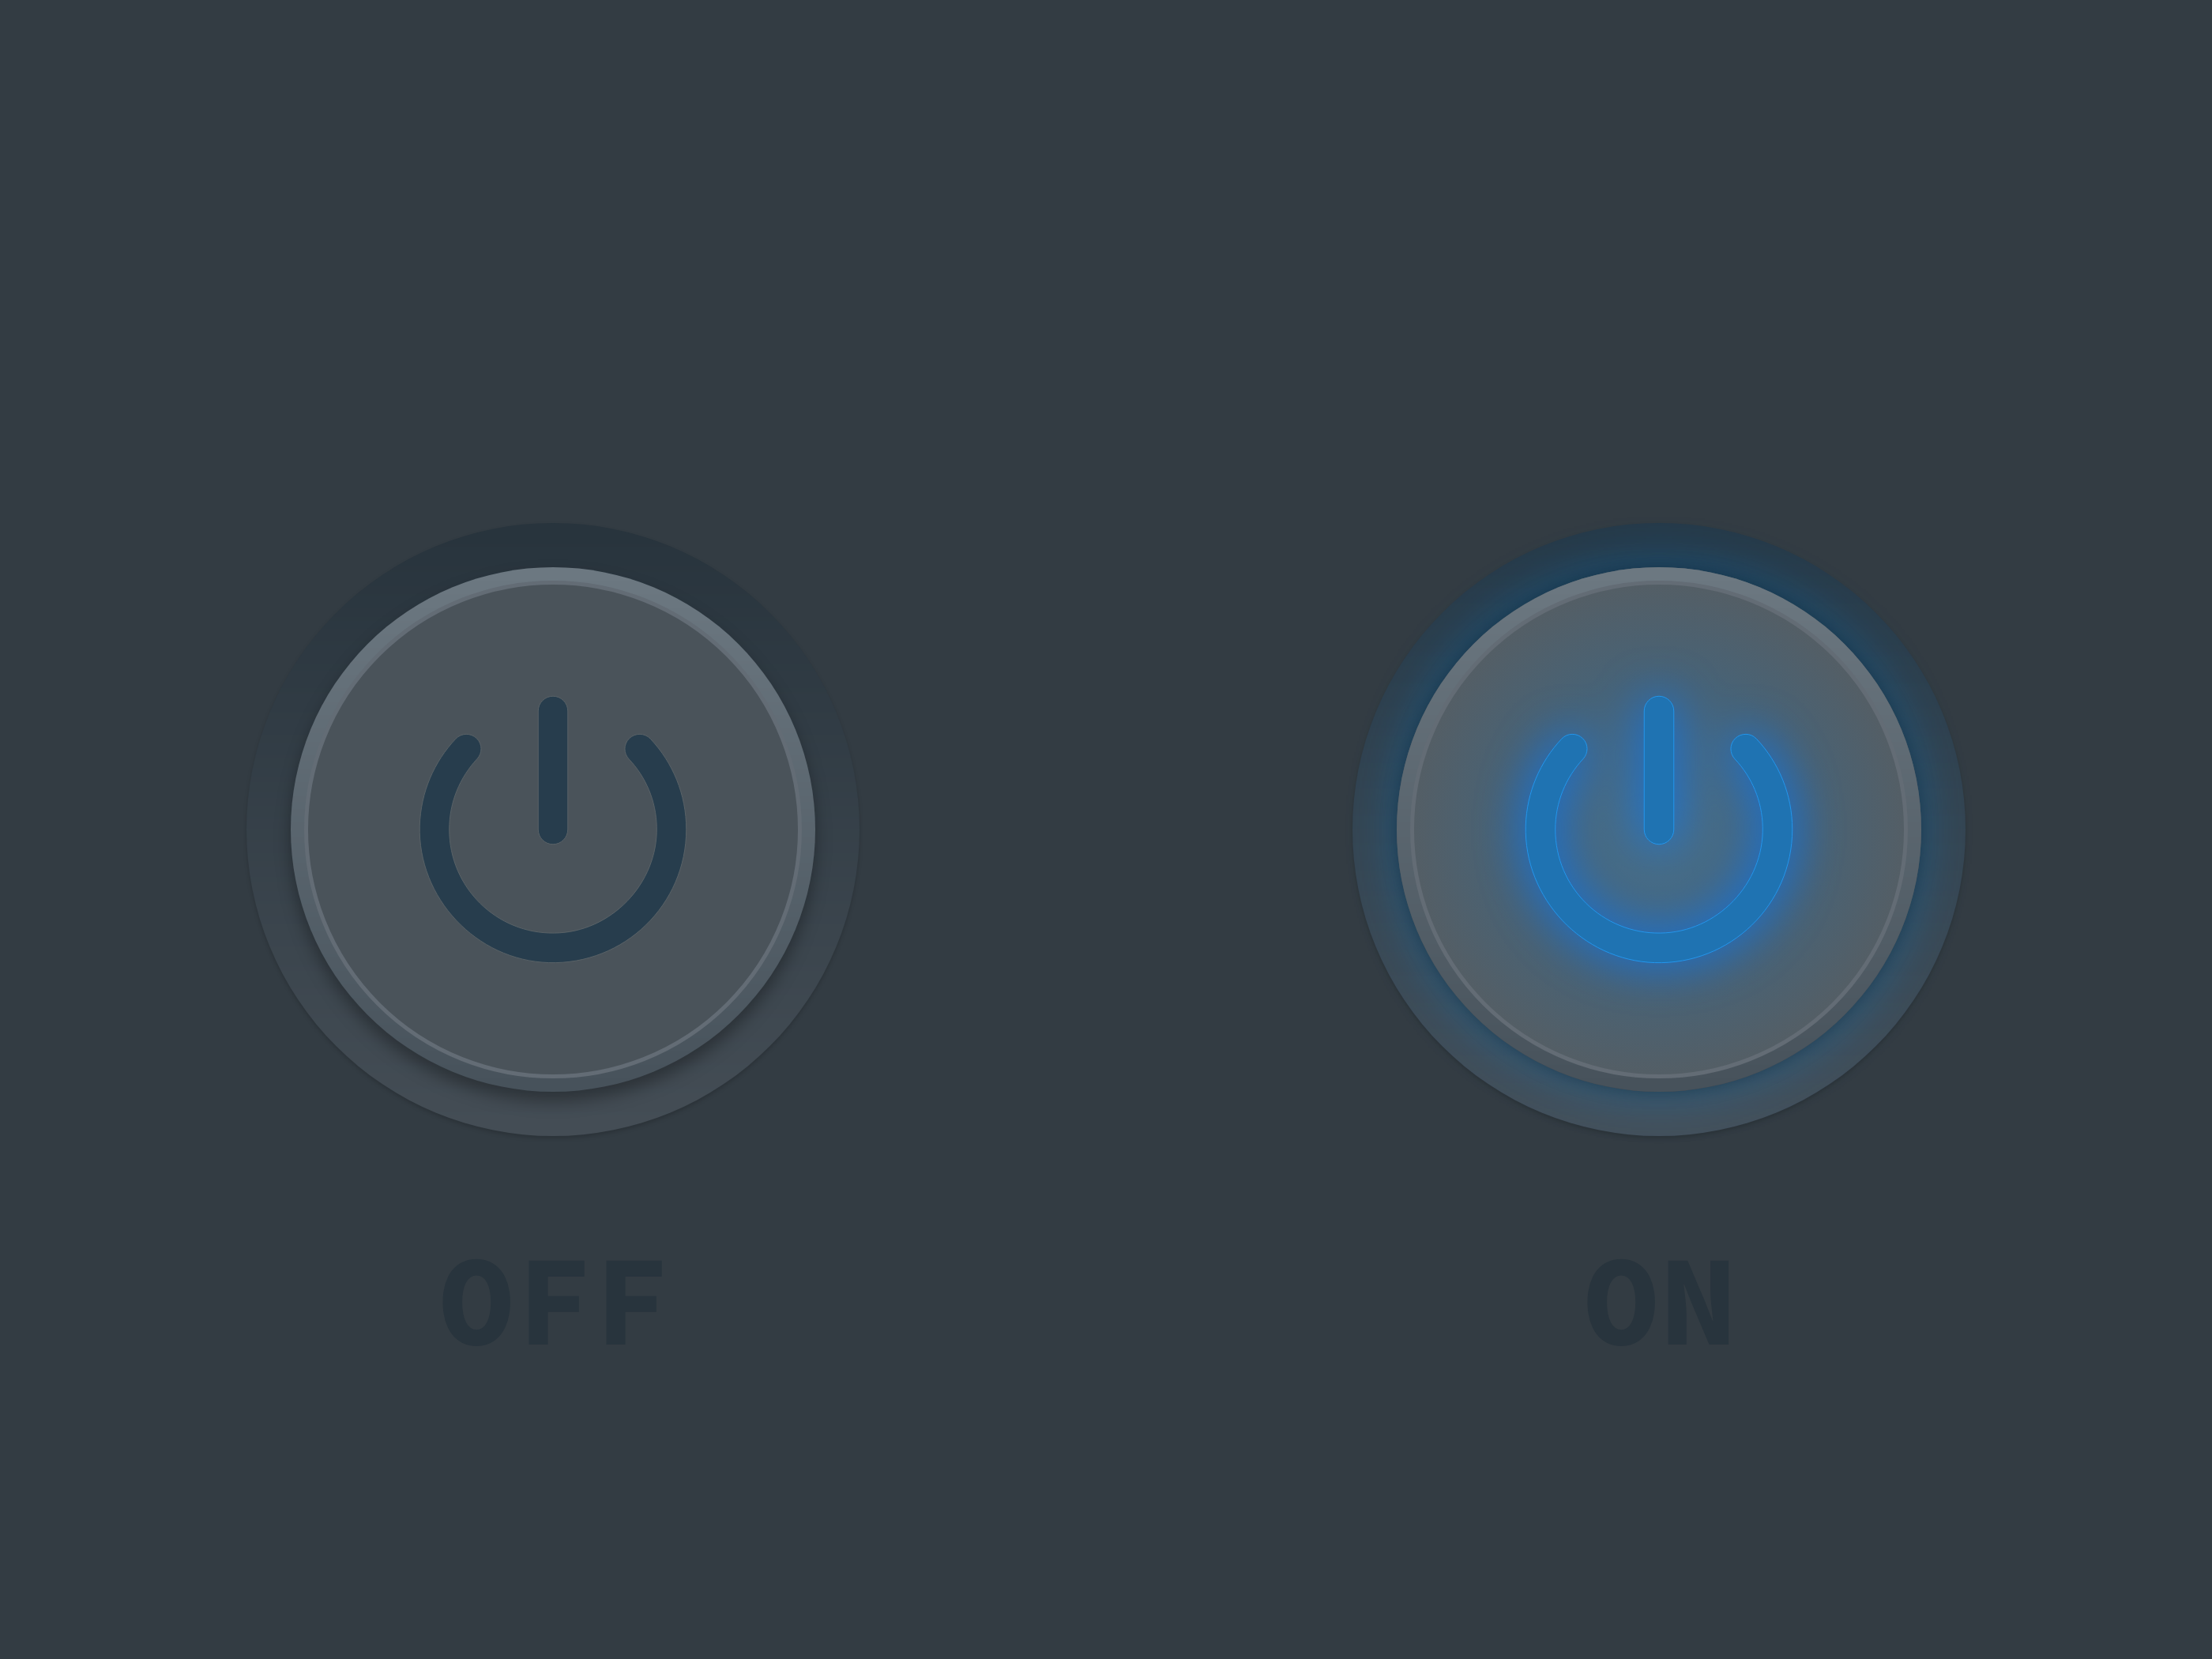 A large grey power toggle button in both on and off positions. The on switch has bright blue illumination.